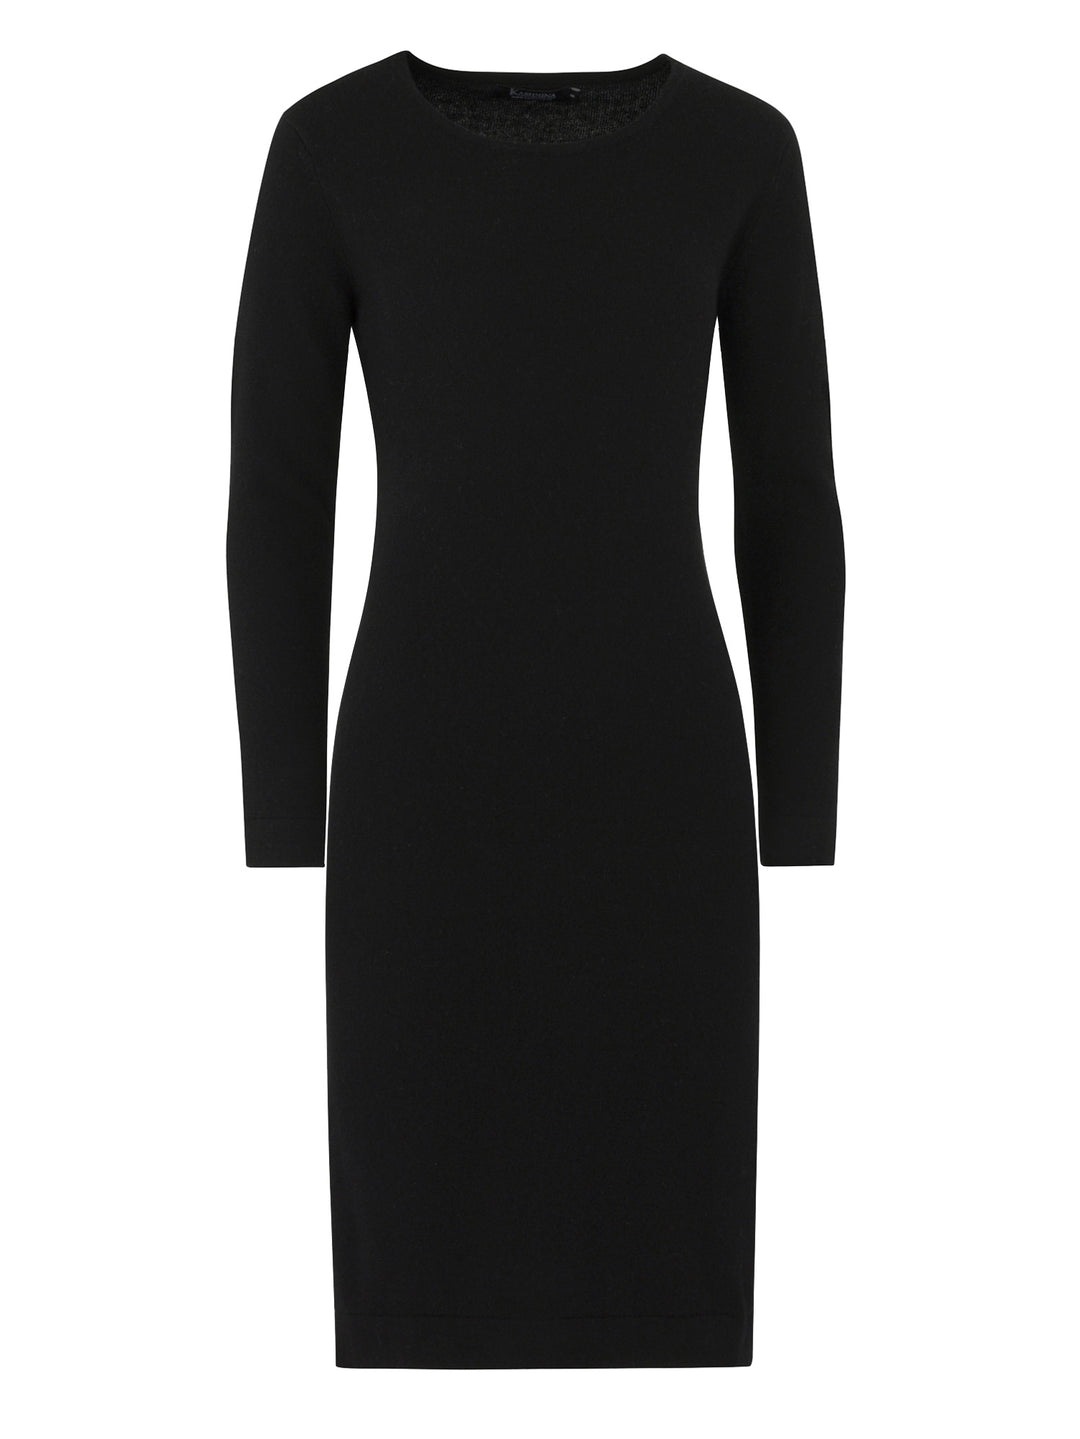 Cashmere dress from Kashmina in 100% cashmere